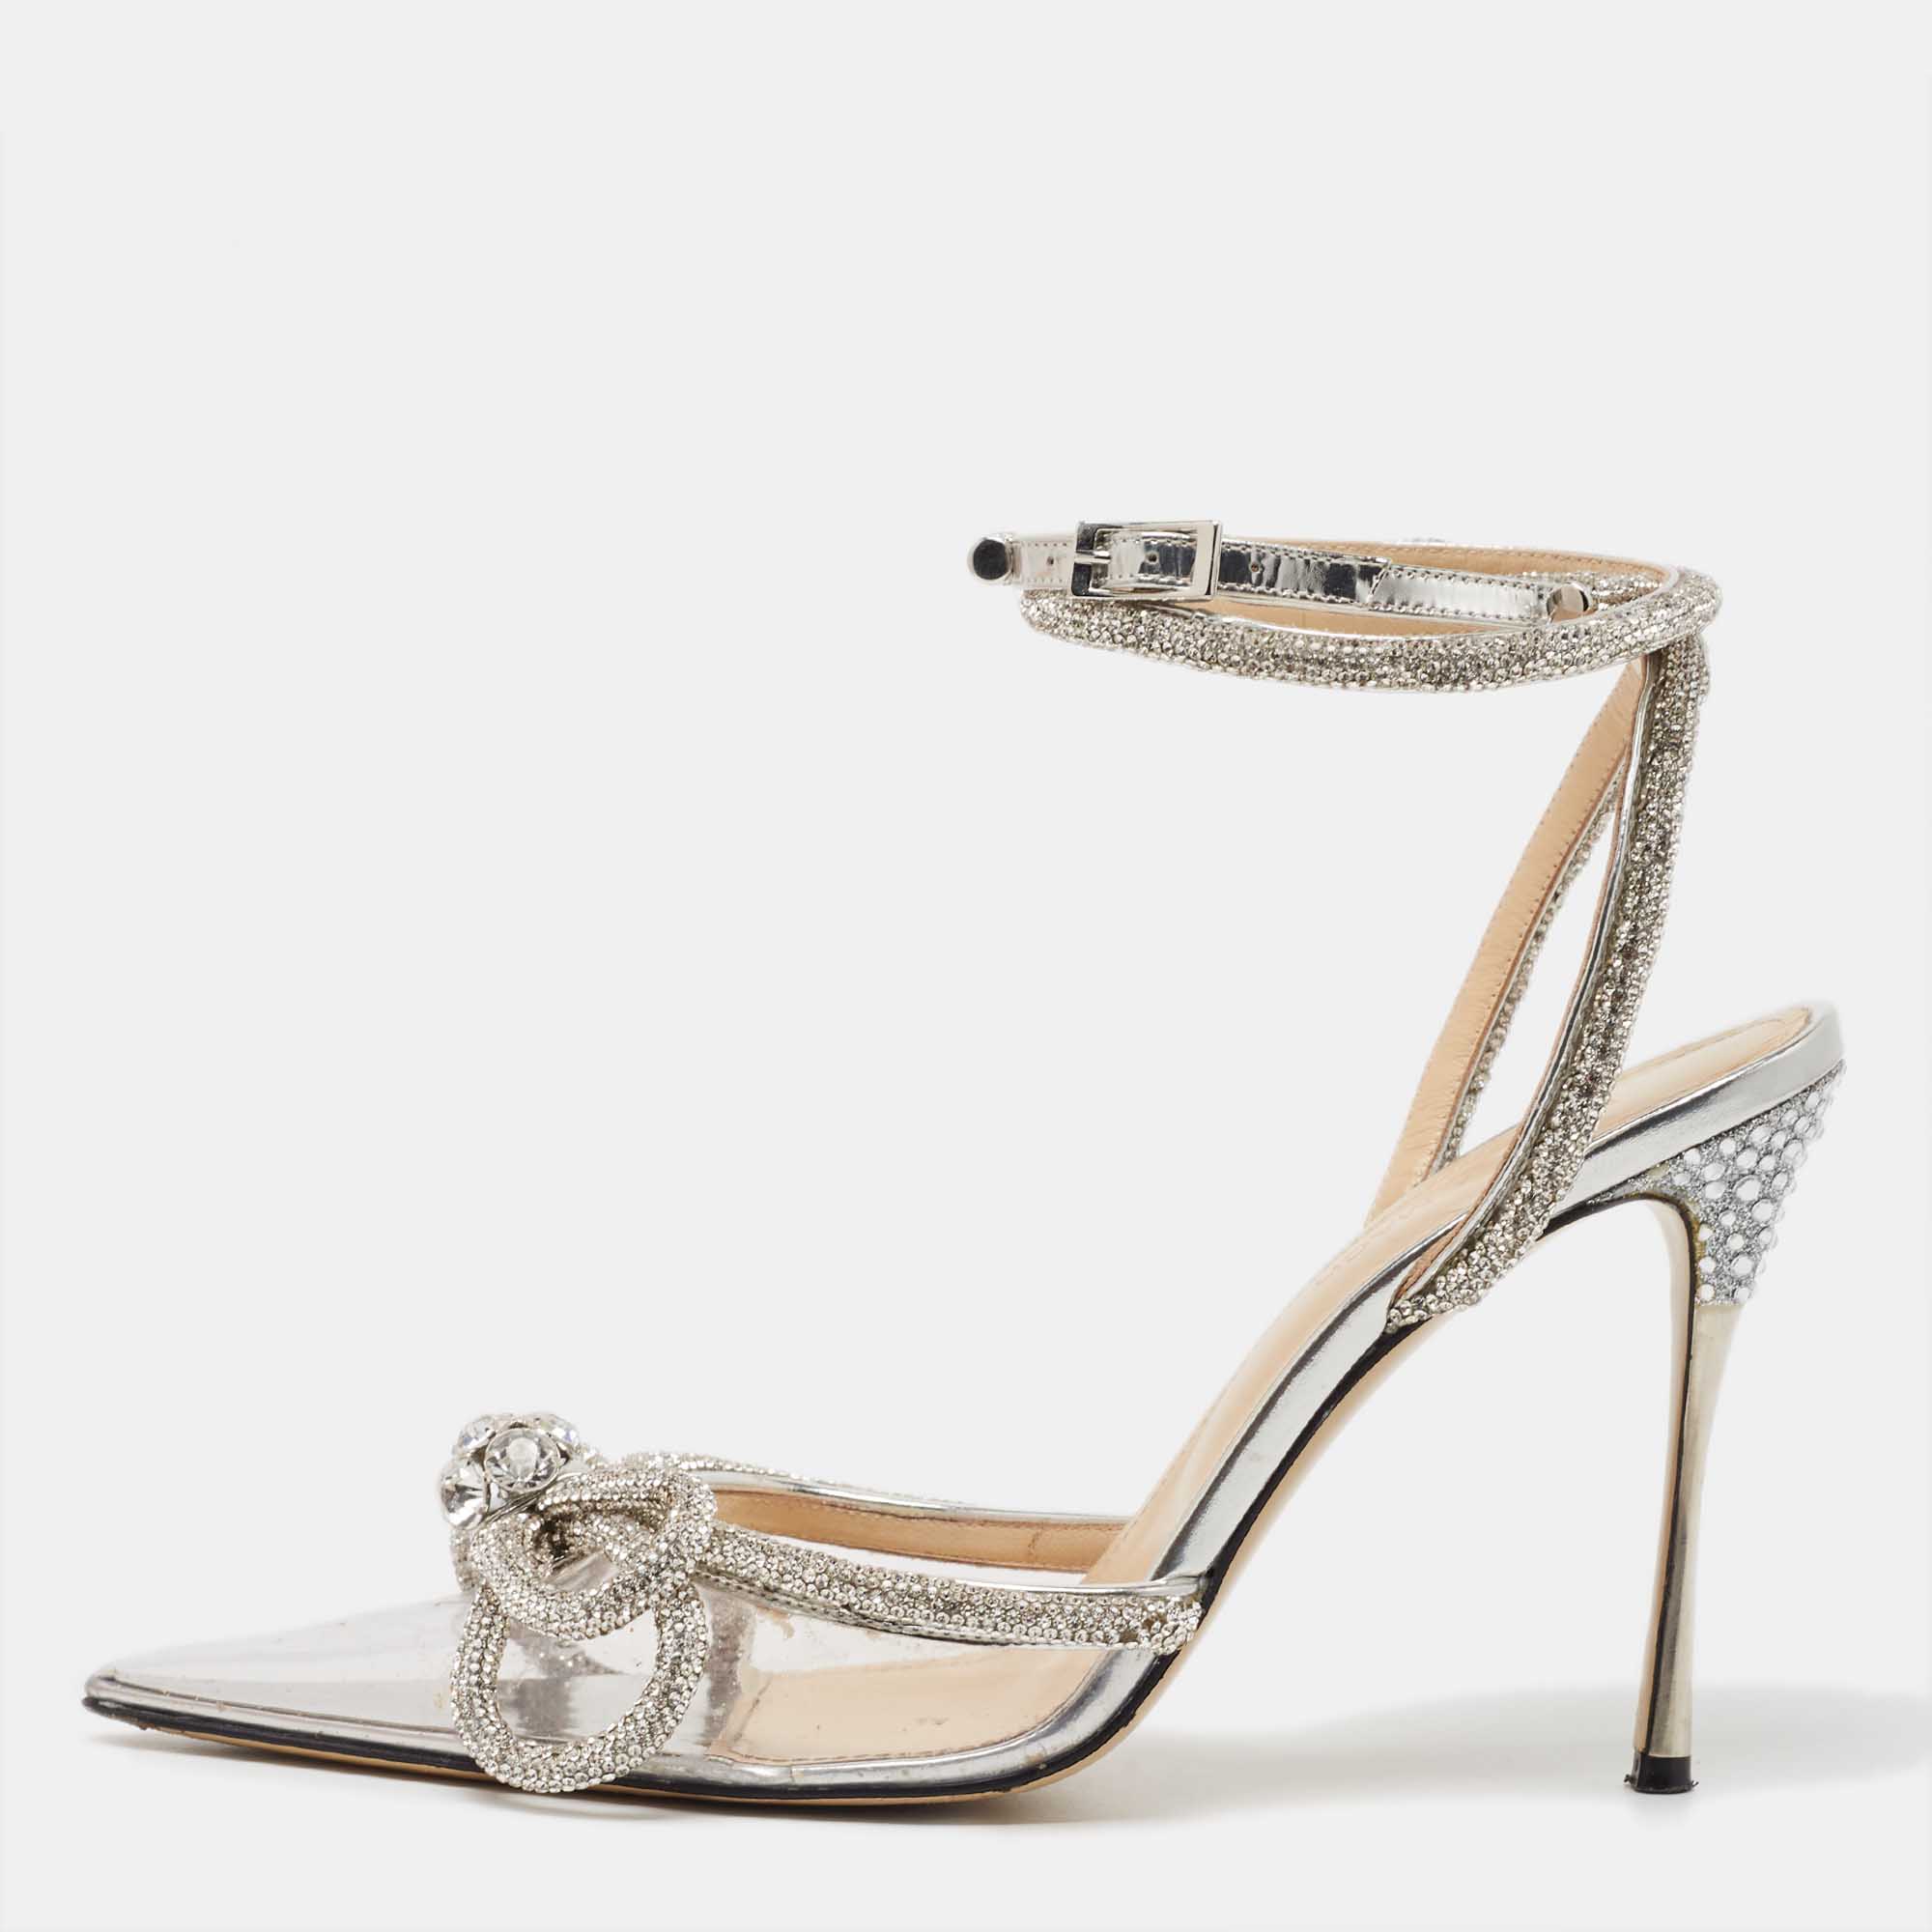 Chanel Shoes 39/8 Two Tone Pump Sandels Clear Heels comfortable Slingback.  Clear